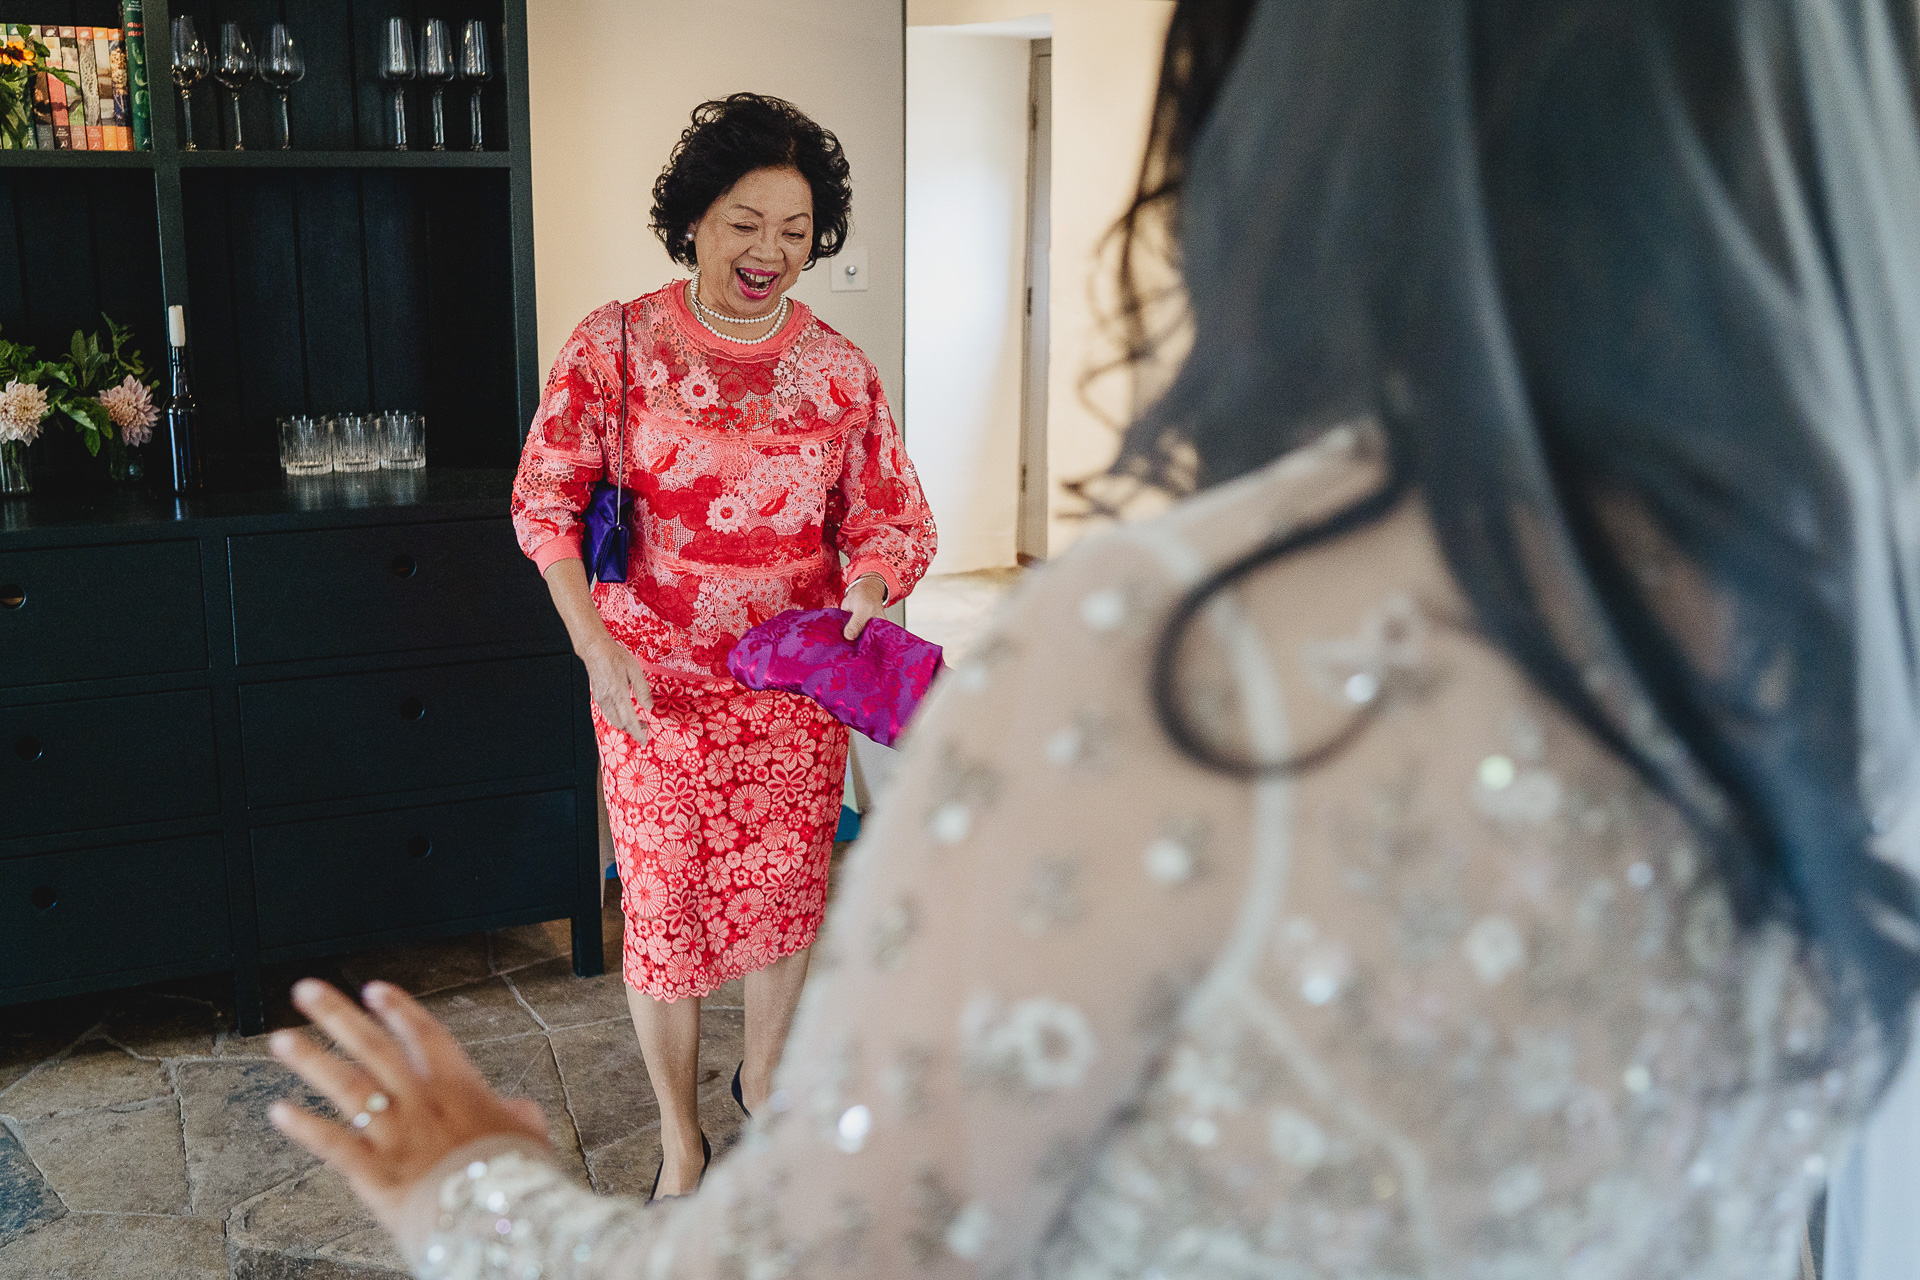 Mother of the bride smiling at bride